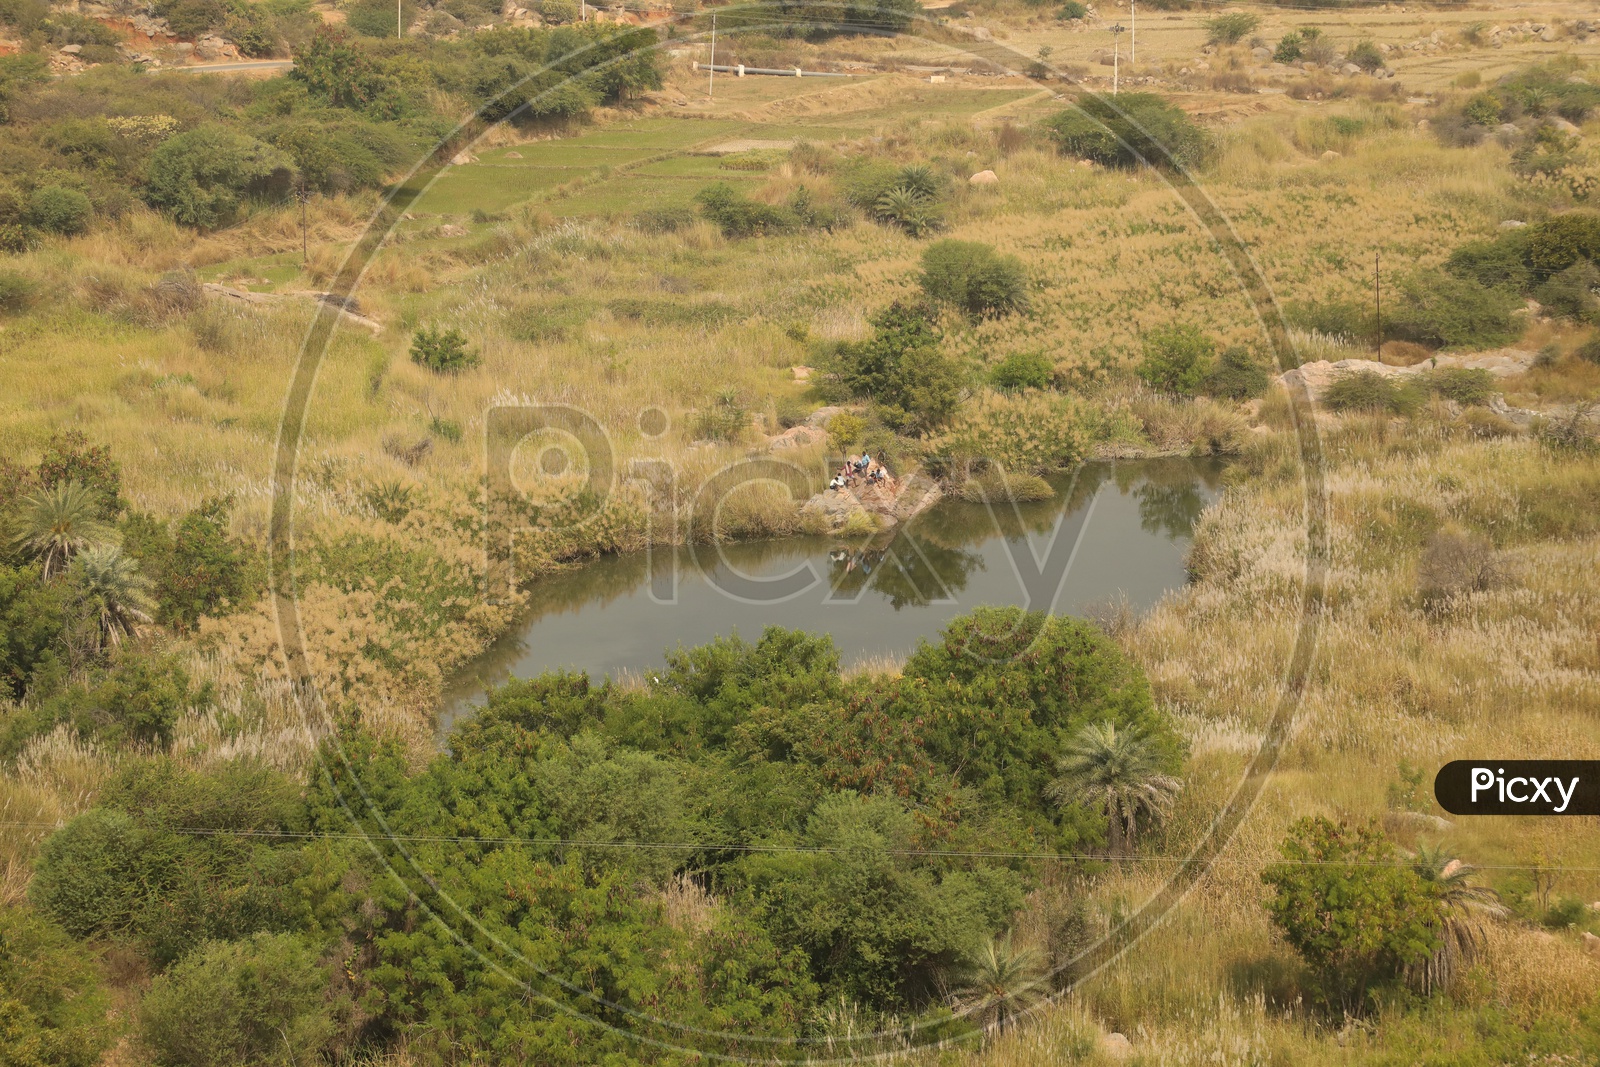 Aerial View Of a Water Pond In Barren Lands In Village Outskirts